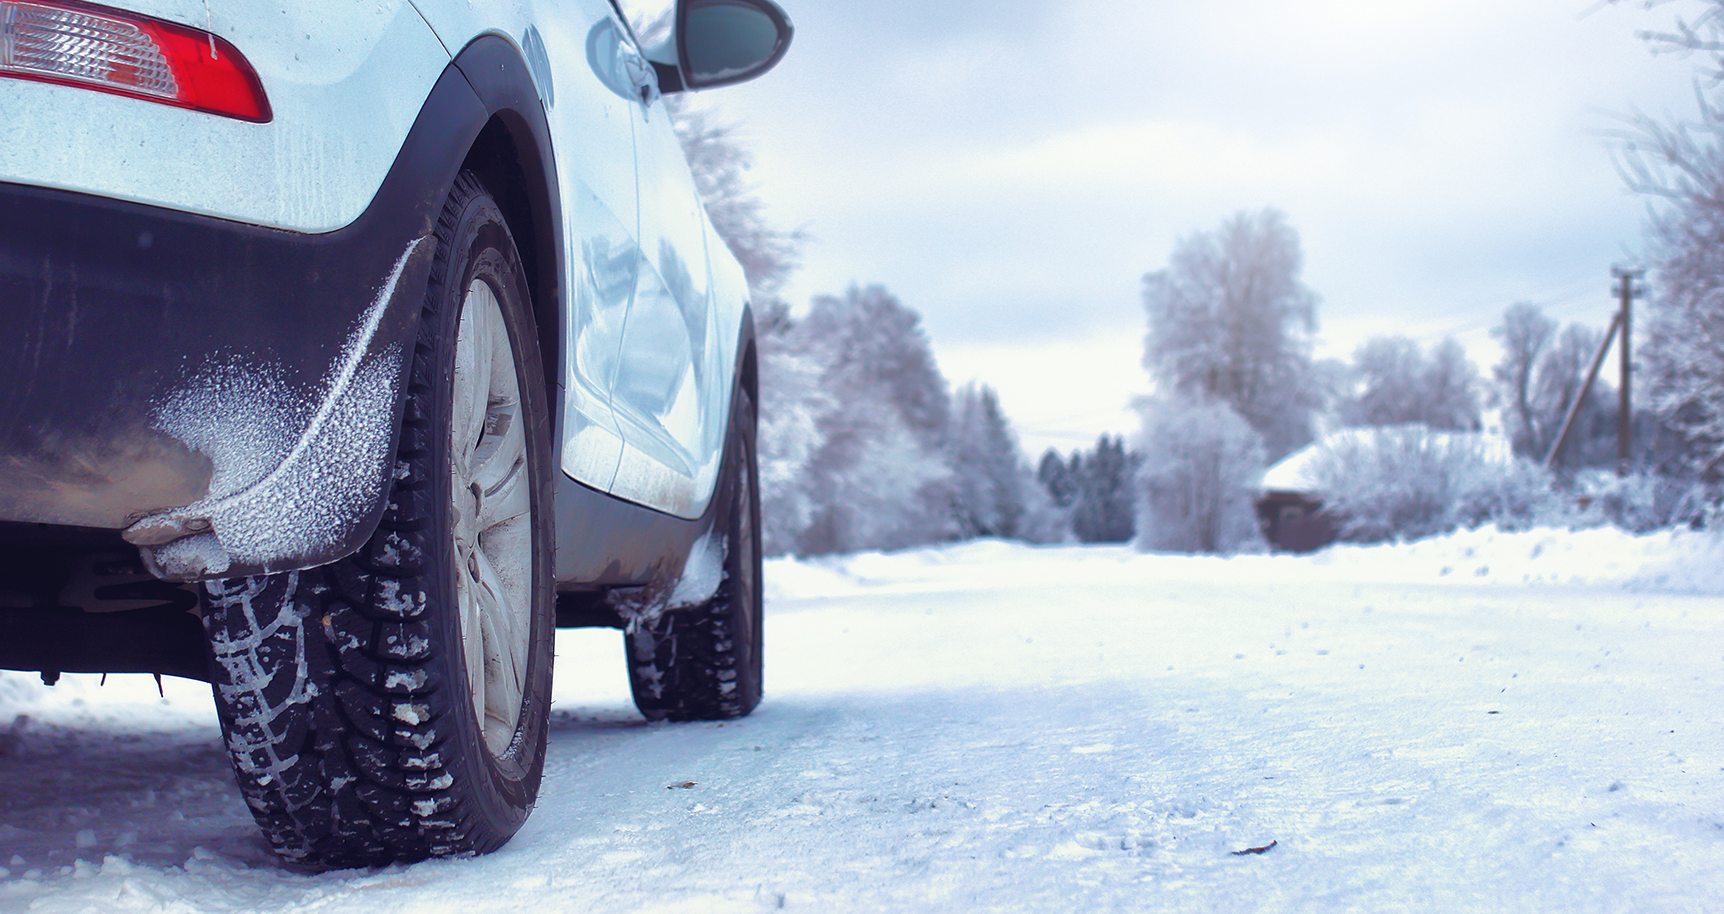 How to prepare for harsh winter conditions with winter tires